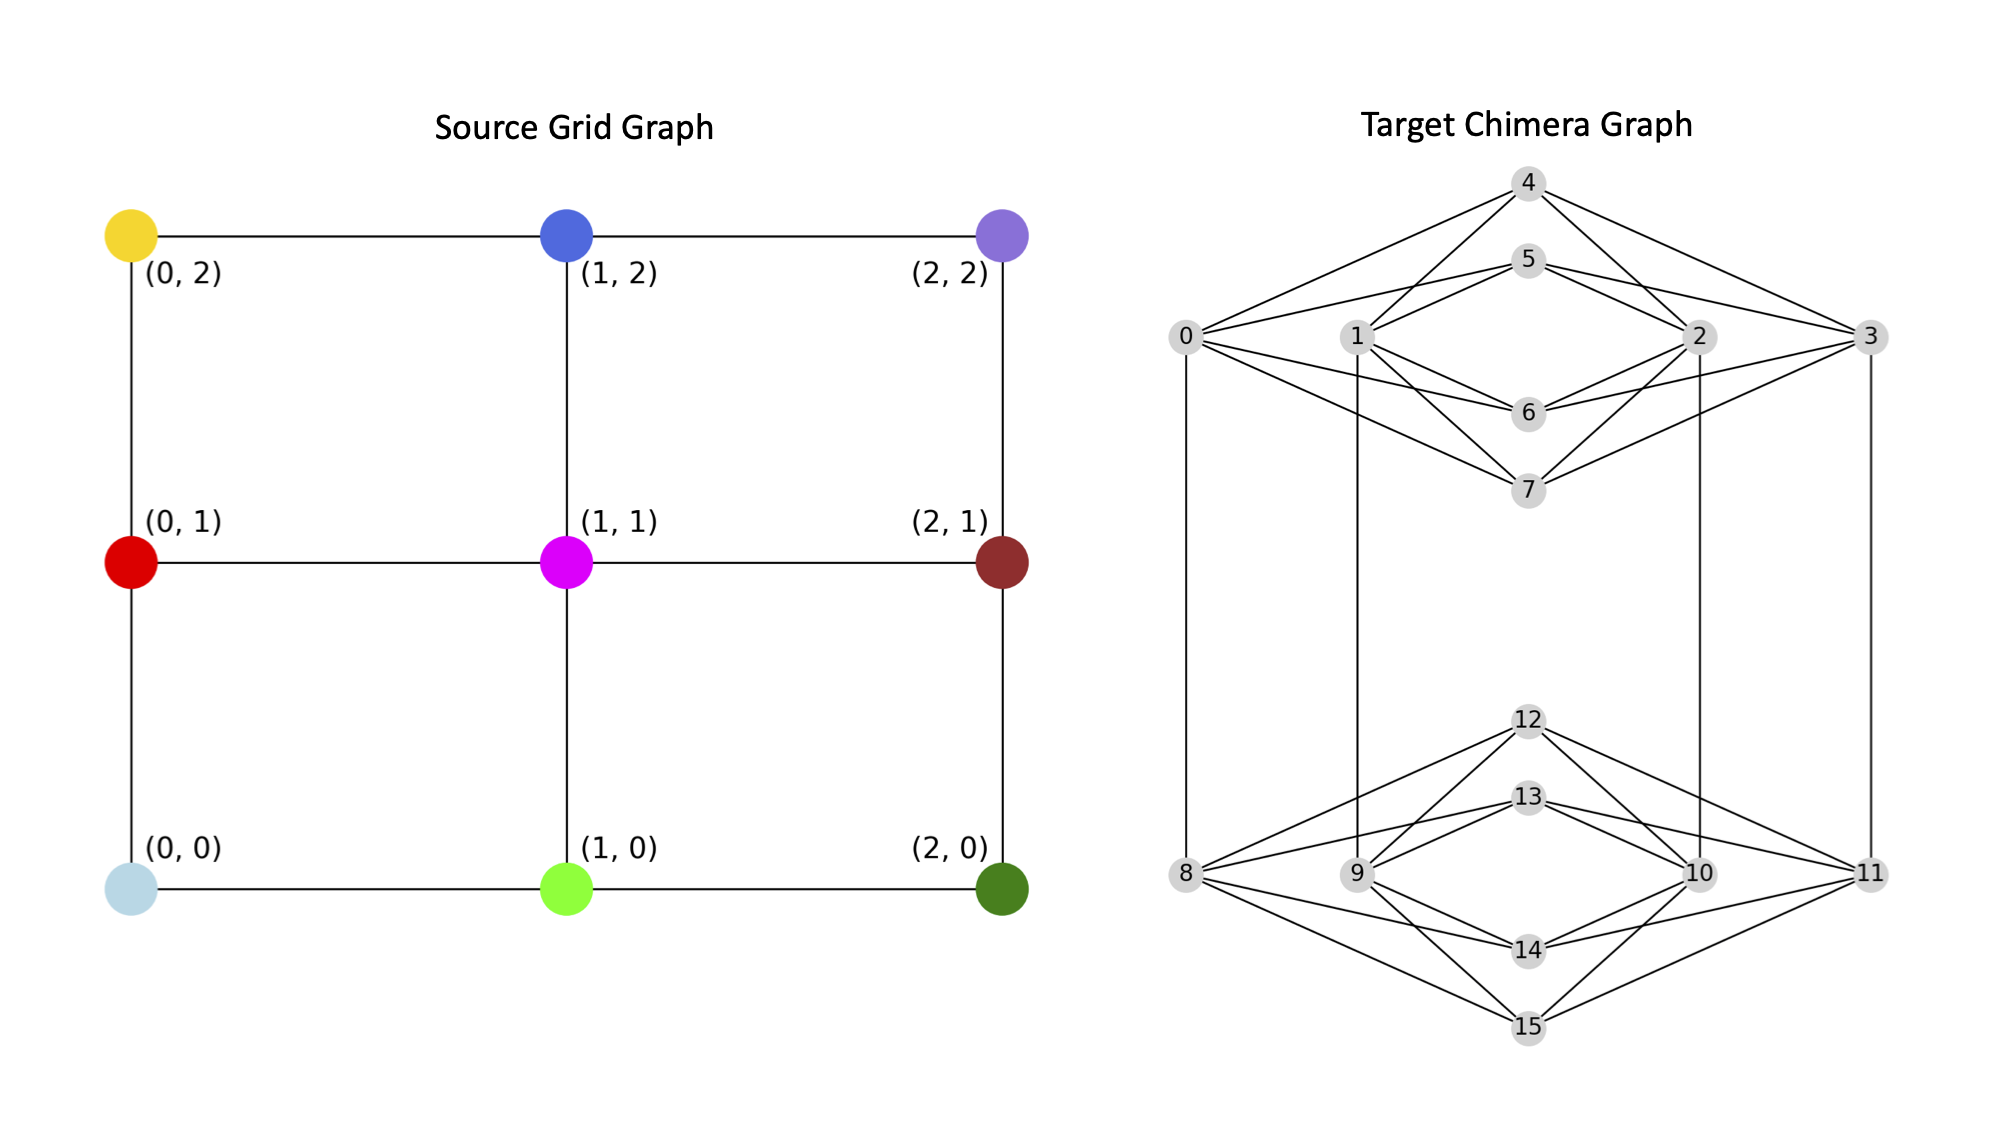 Source 2-dimensional 3x3 grid graph and a target Chimera graph